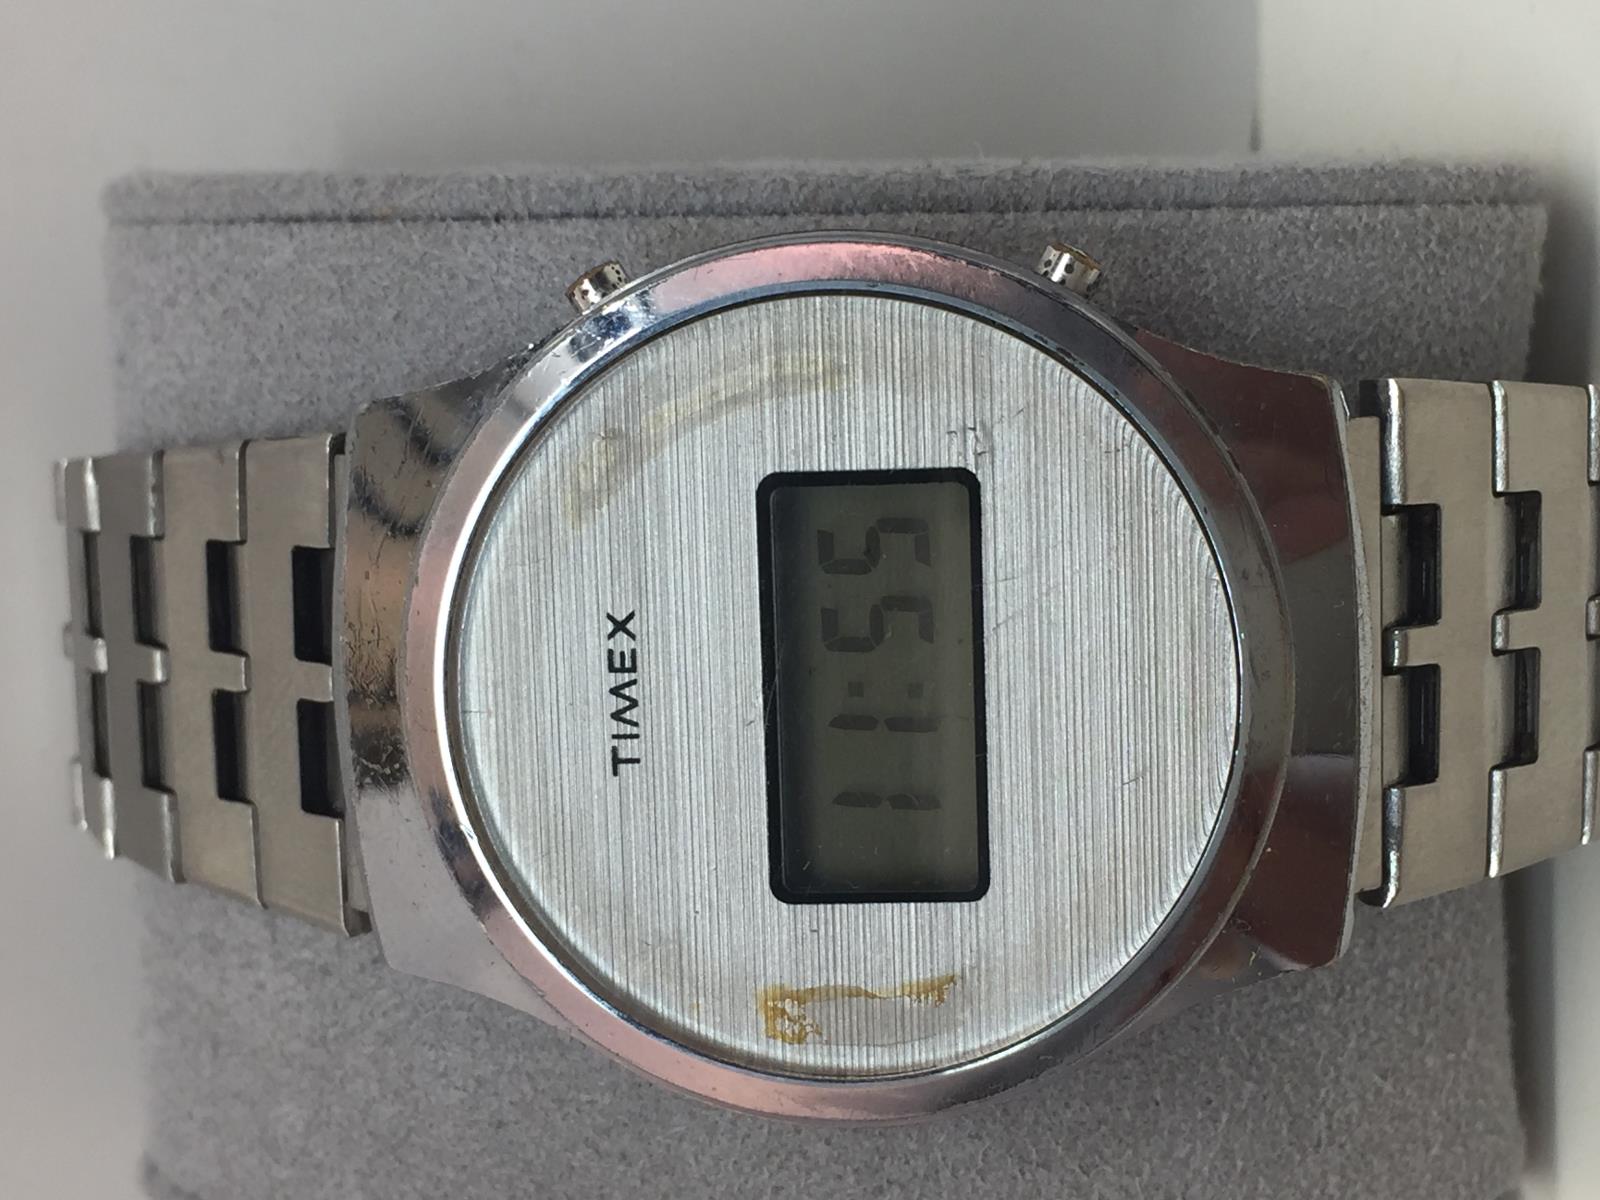 Timex Original Digital Watch Circa 1970.Used - Working. Features Date/Time/Light